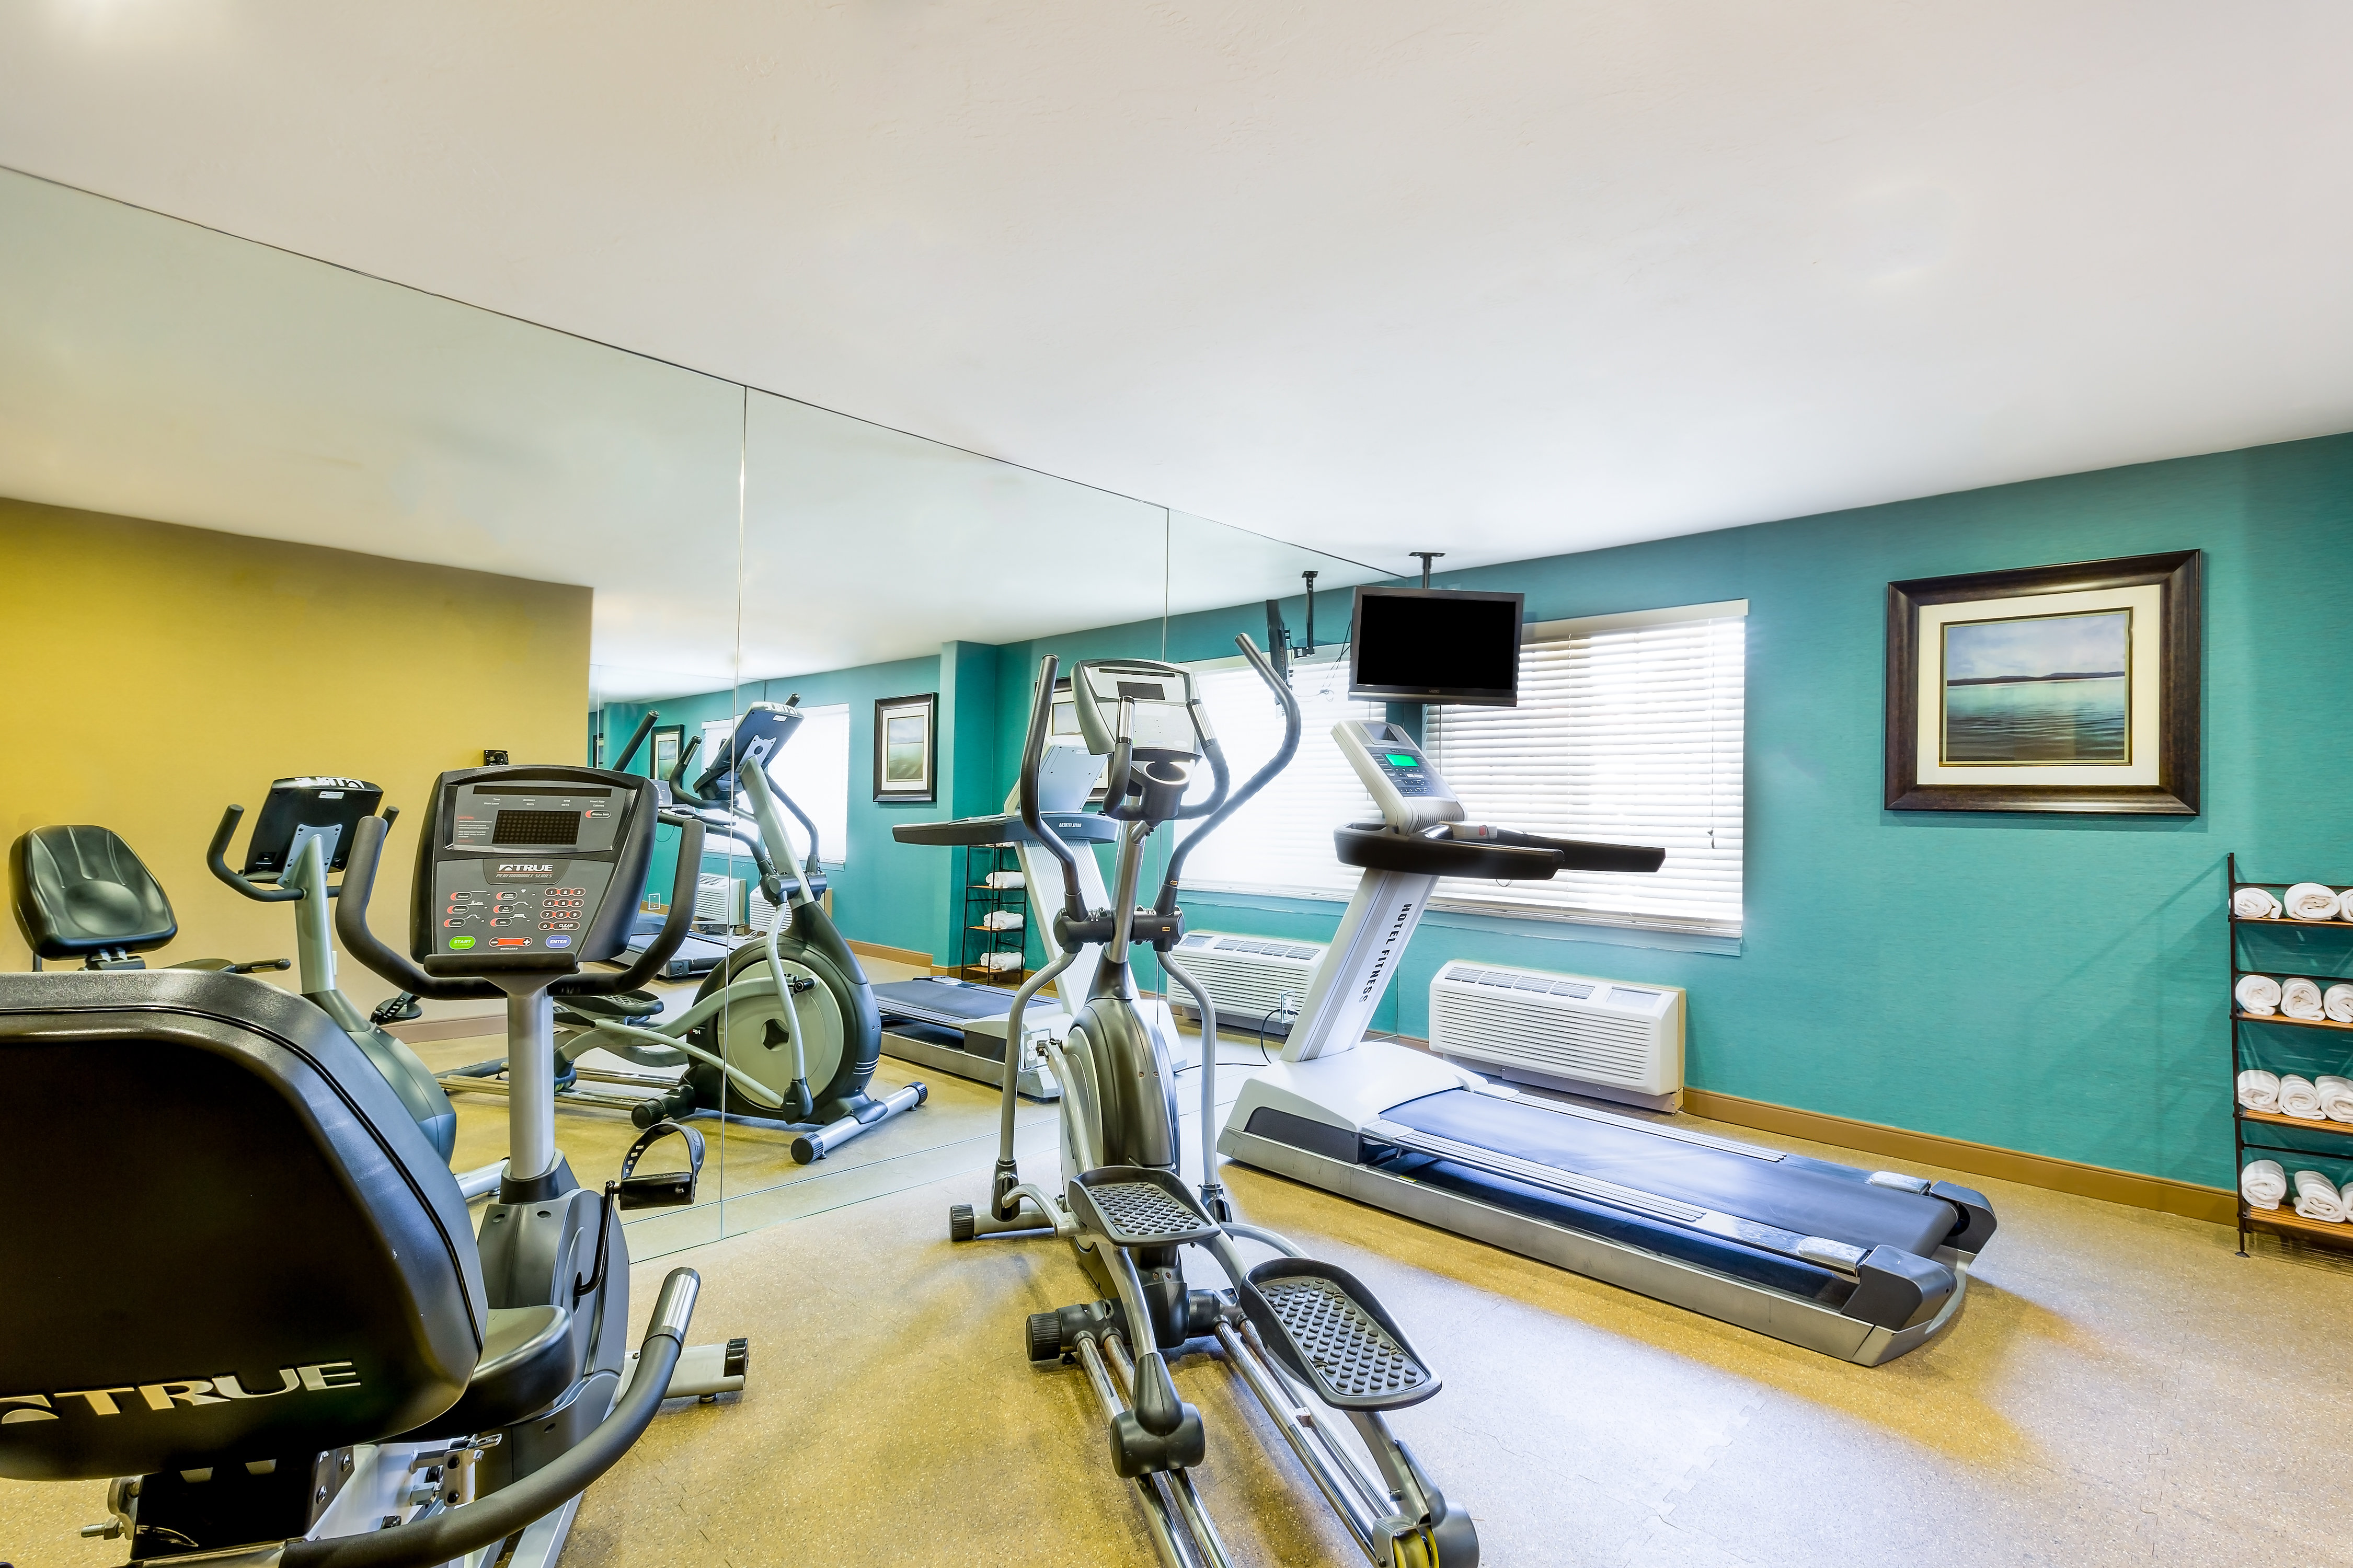 Our fitness center is open from 5:00 AM to 10:00 PM every day